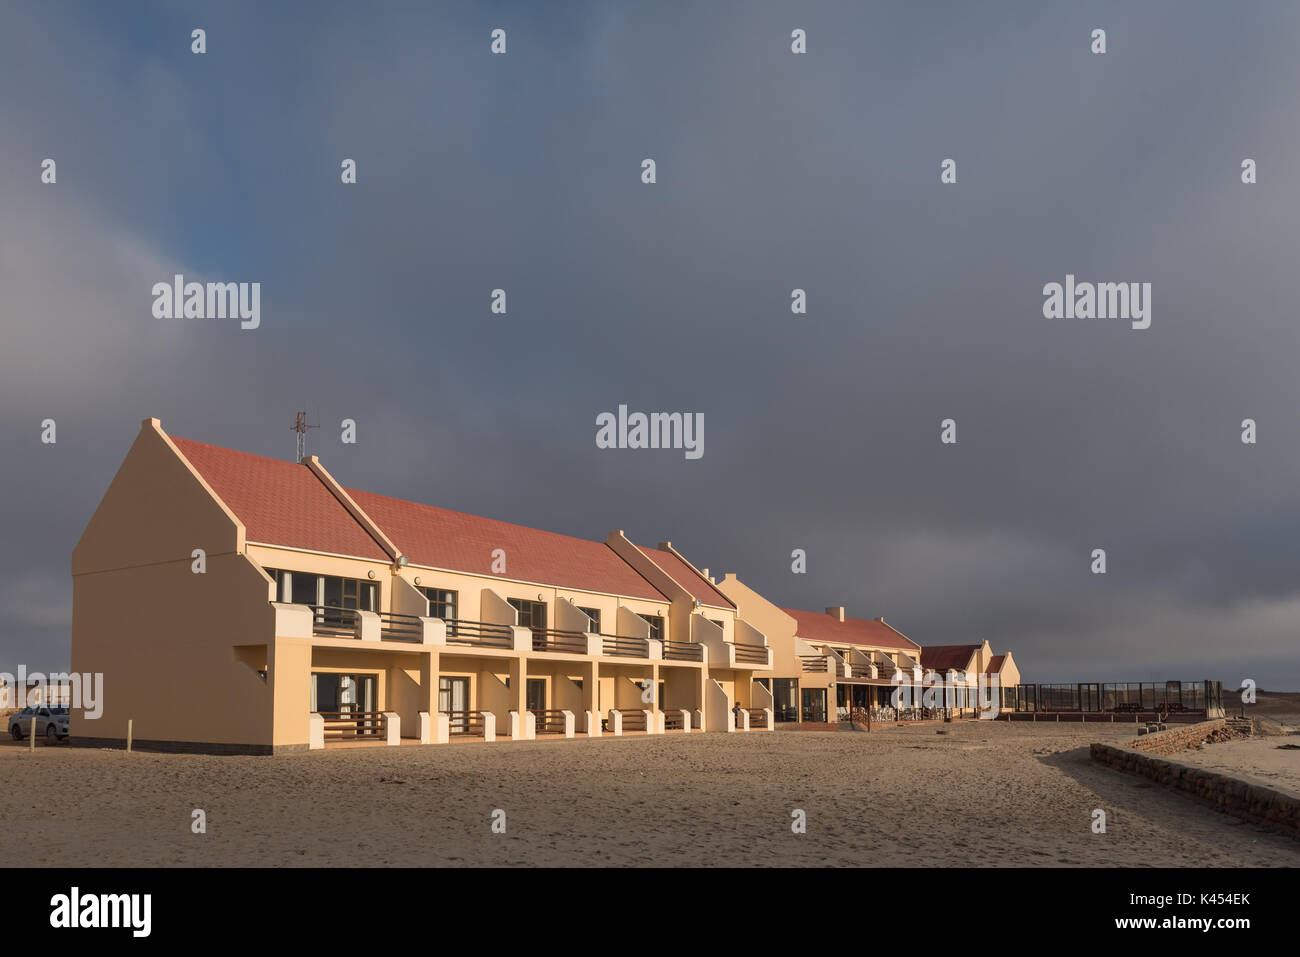 CAPE CROSS, NAMIBIA - JUNE 28, 2017: Part of the lodge at Cape Cross at sunset in the Dorob National Park of Namibia Stock Photo